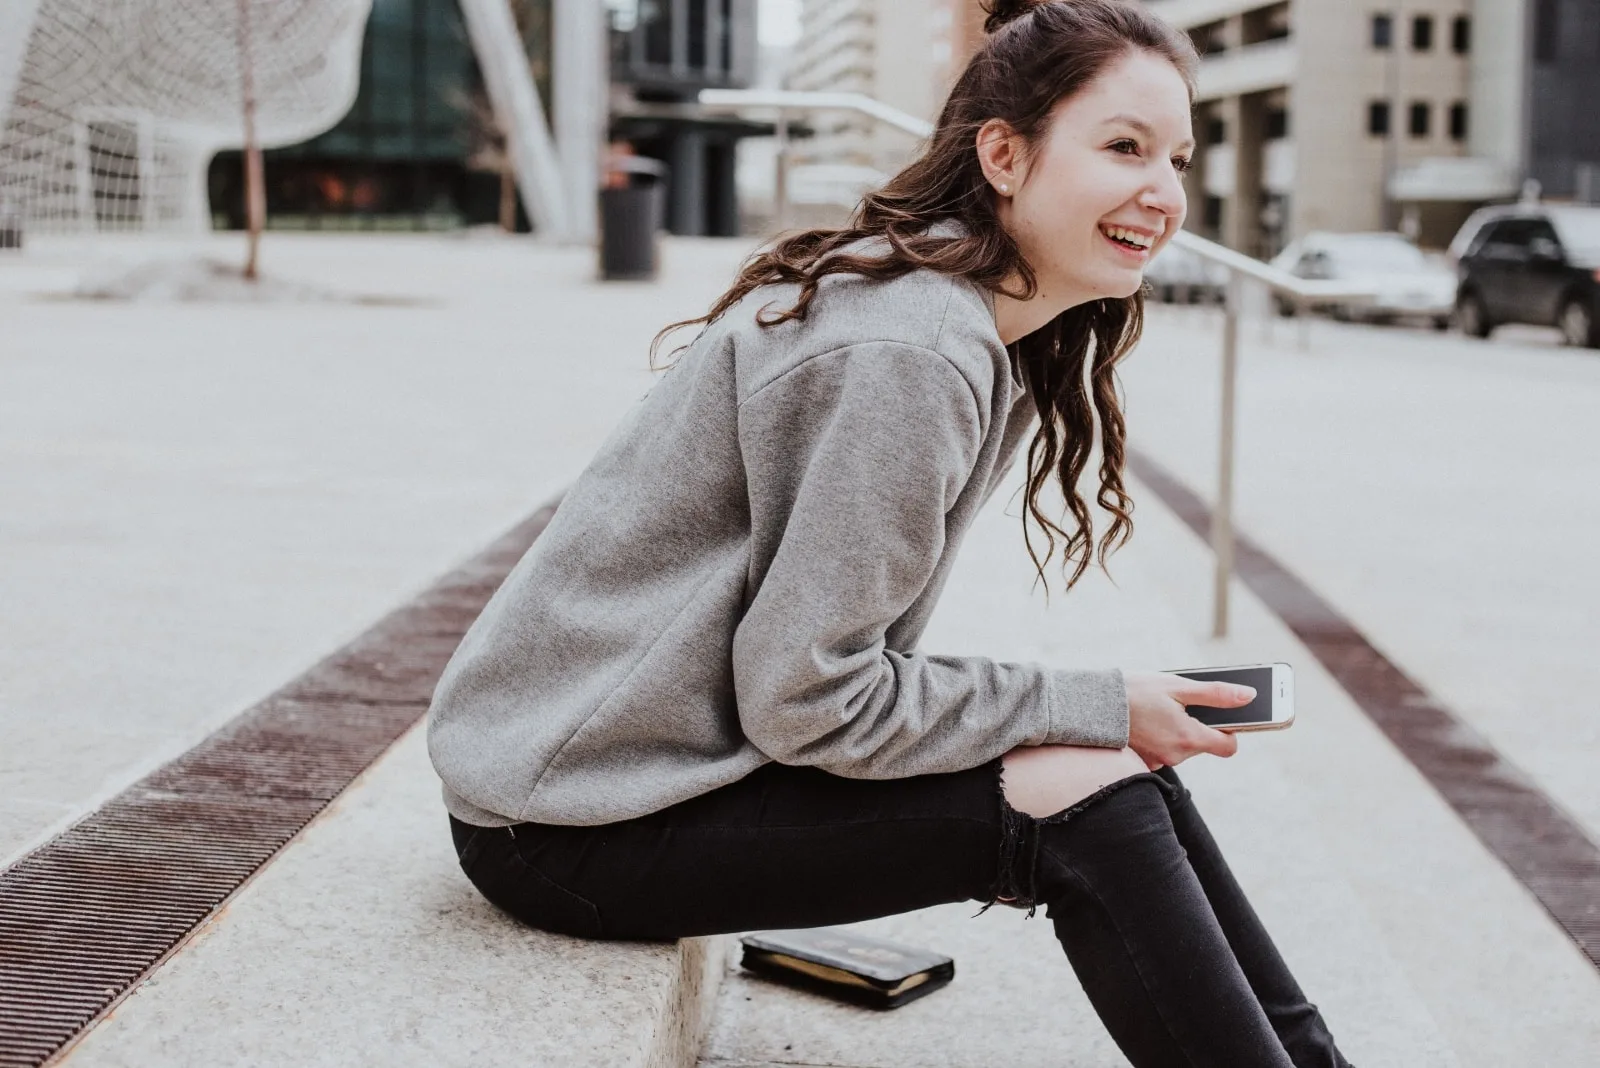 woman in gray sweatshirt sitting on stairs smiling